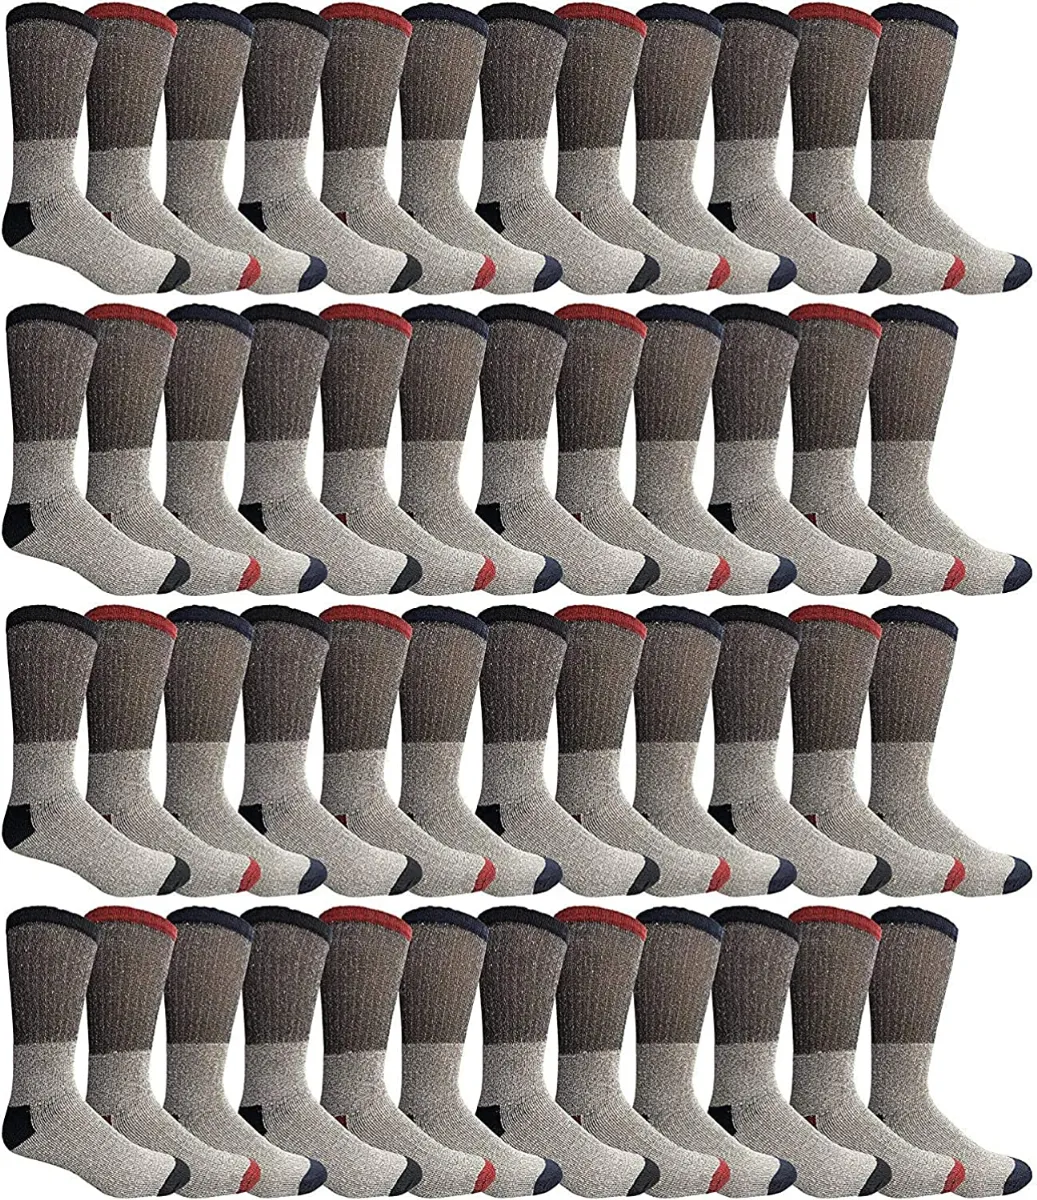 60 Pairs of Kids Thermal Boot Socks, Bulk Pack Thick Warm Winter Extreme Weather Sock Size 6-8